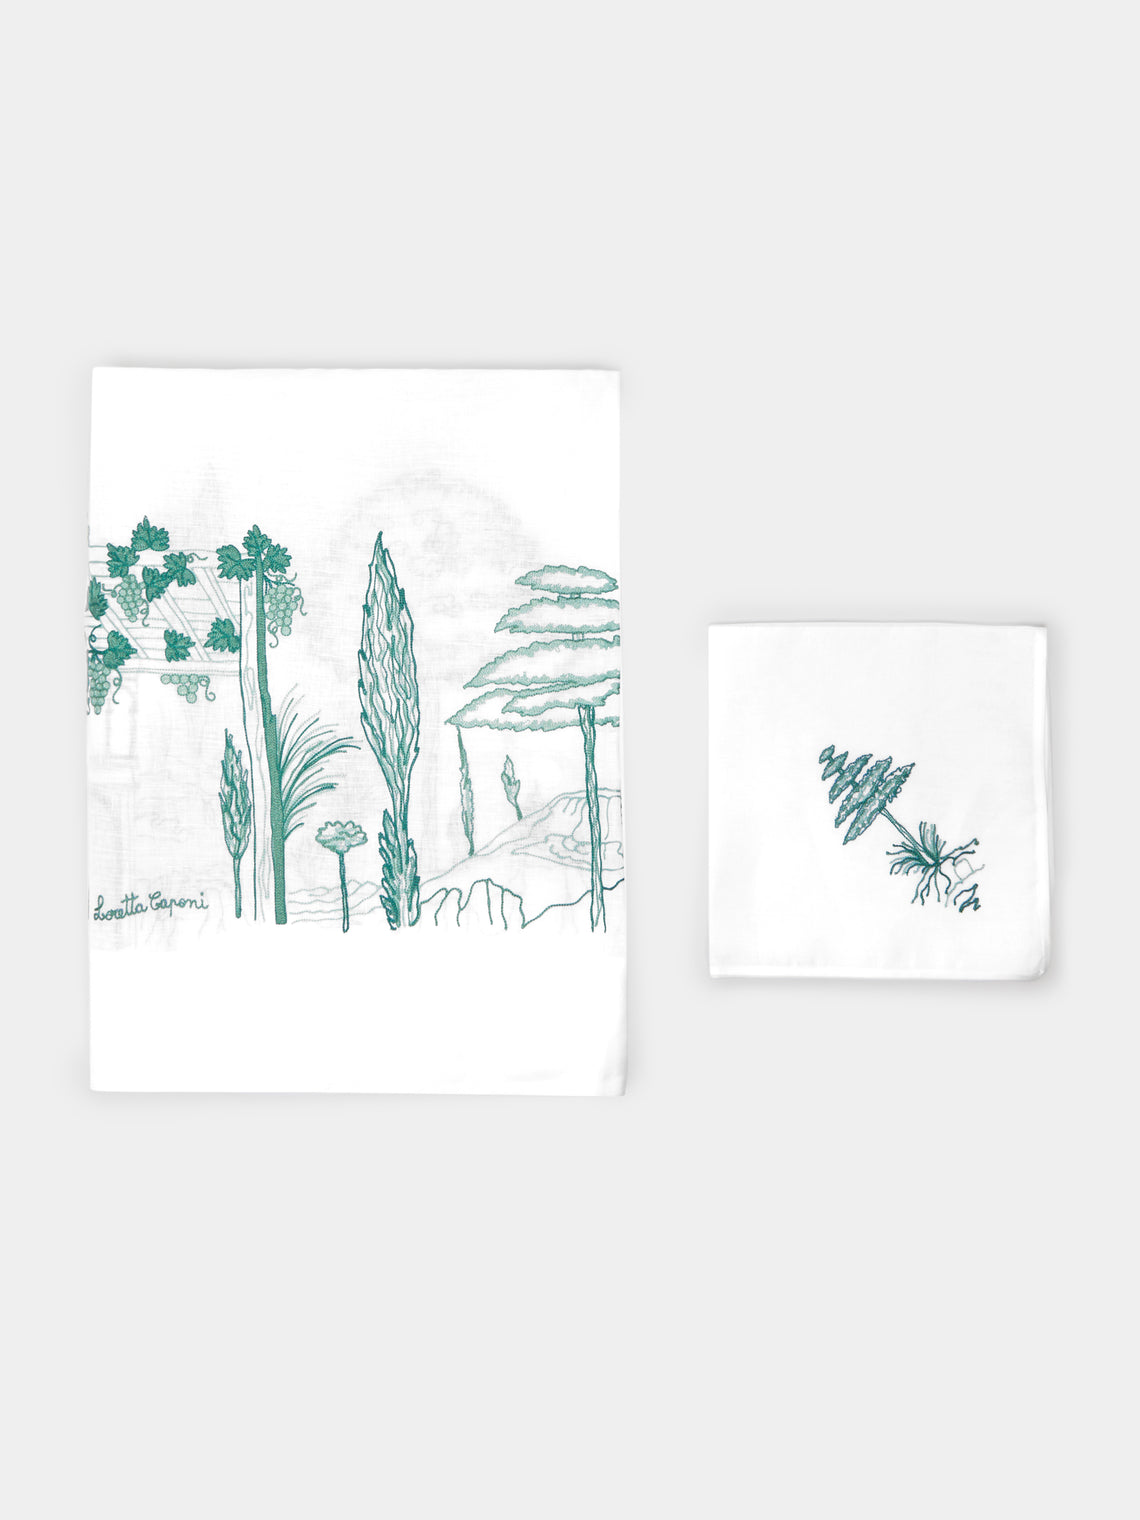 Loretta Caponi - Tuscany Hand-Embroiderd Linen Tablecloth and Napkins (Set of 12) -  - ABASK - 